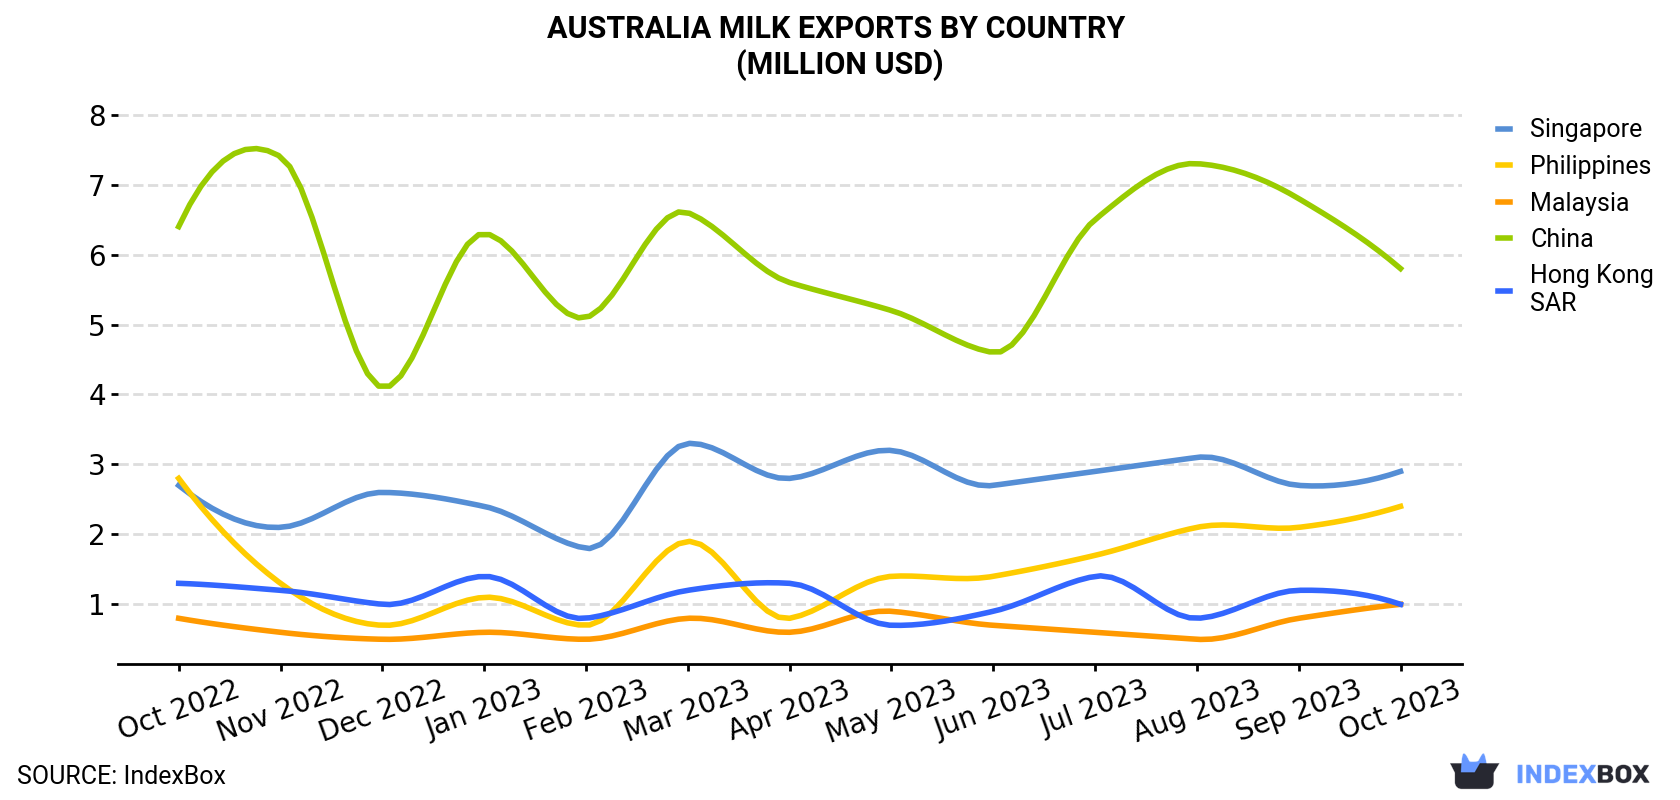 Australia Milk Exports By Country (Million USD)